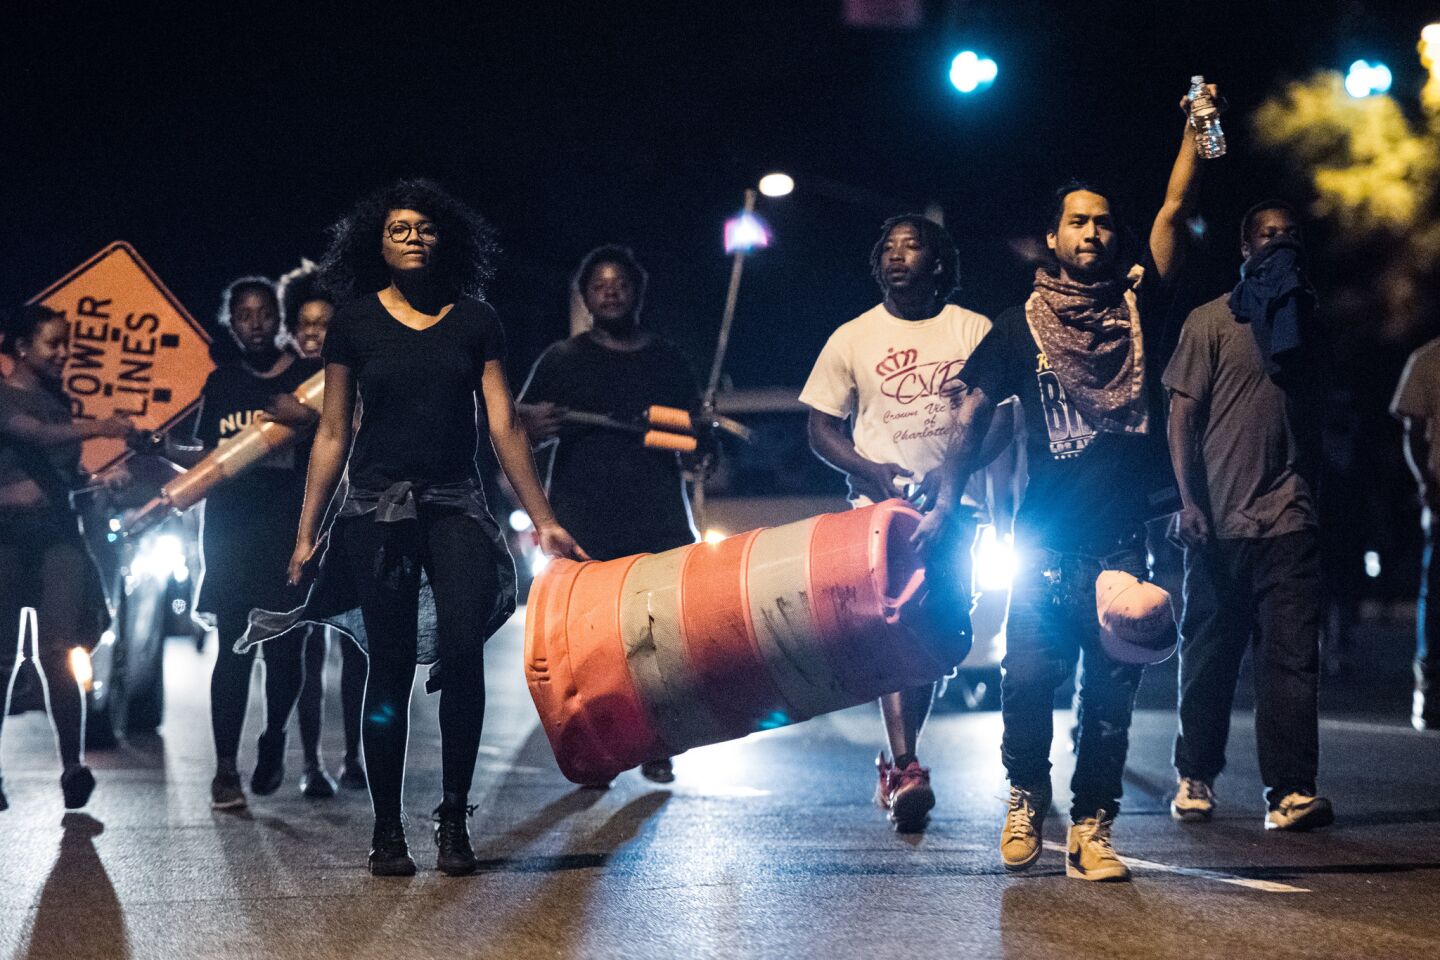 Protests break out in North Carolina after police fatally shoot black man